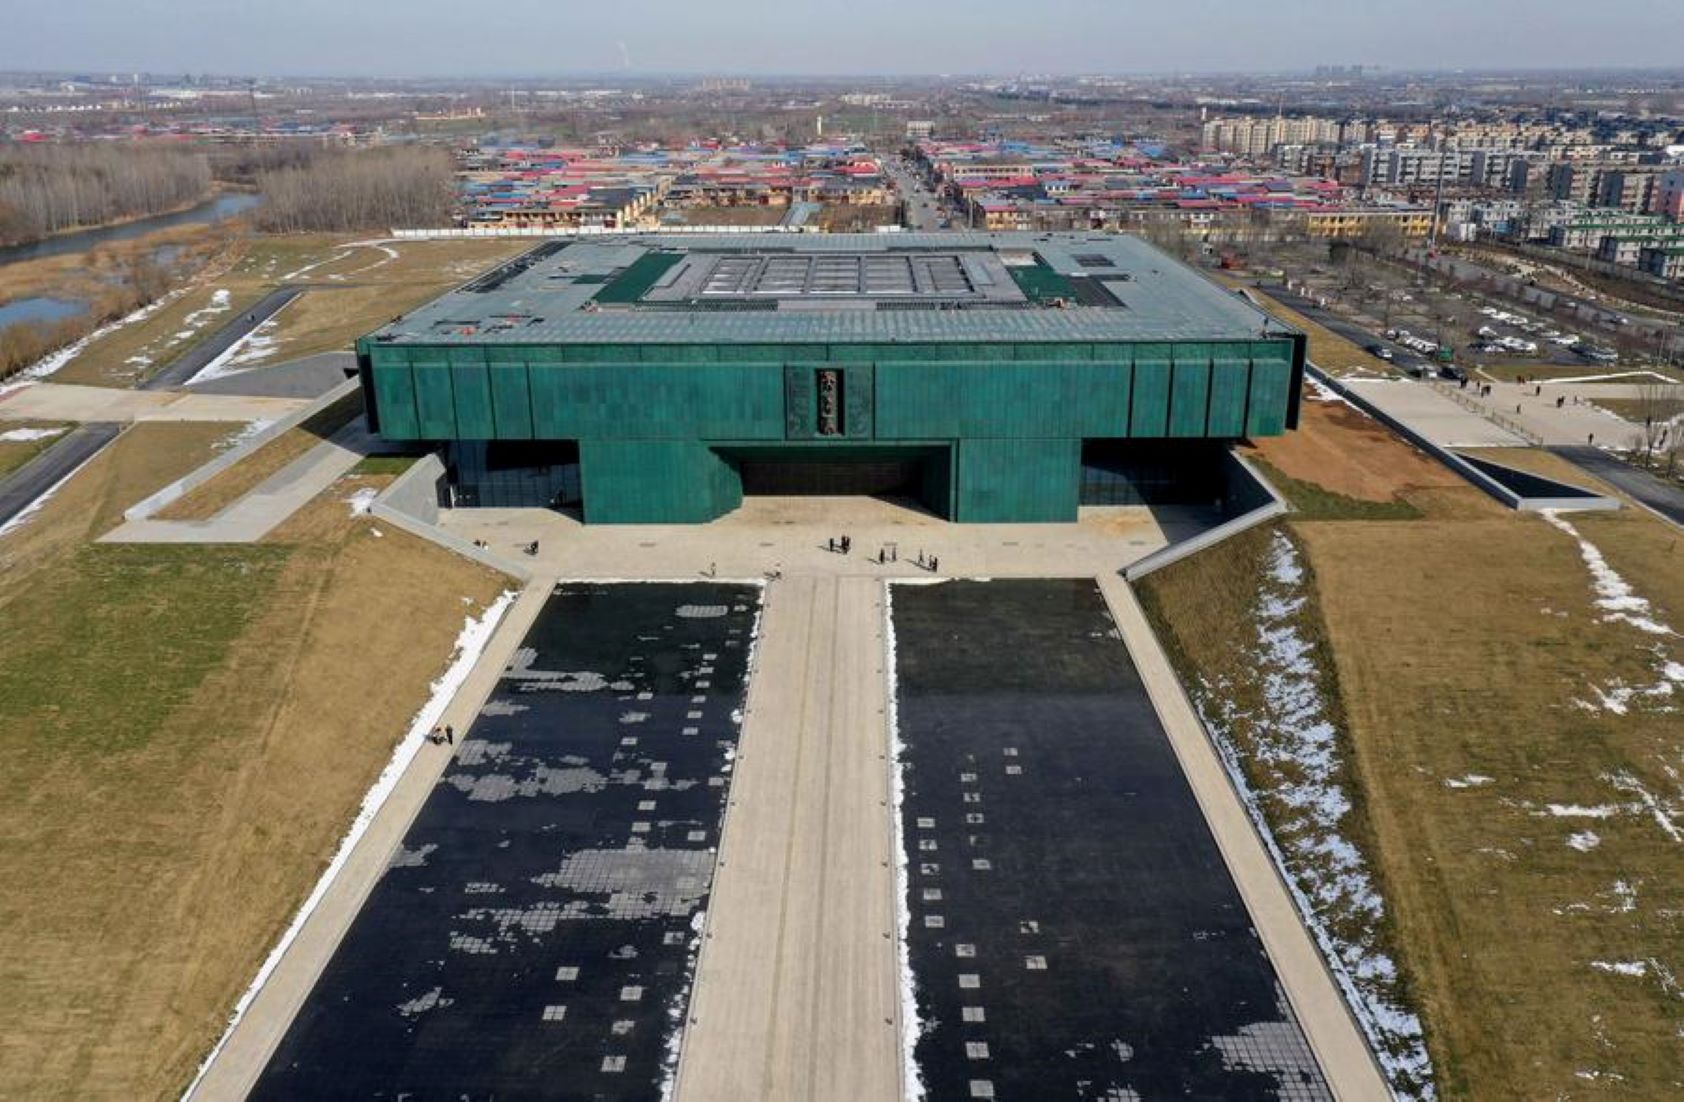 New Museum Building Opened At China’s Shang Dynasty Capital Archaeological Site